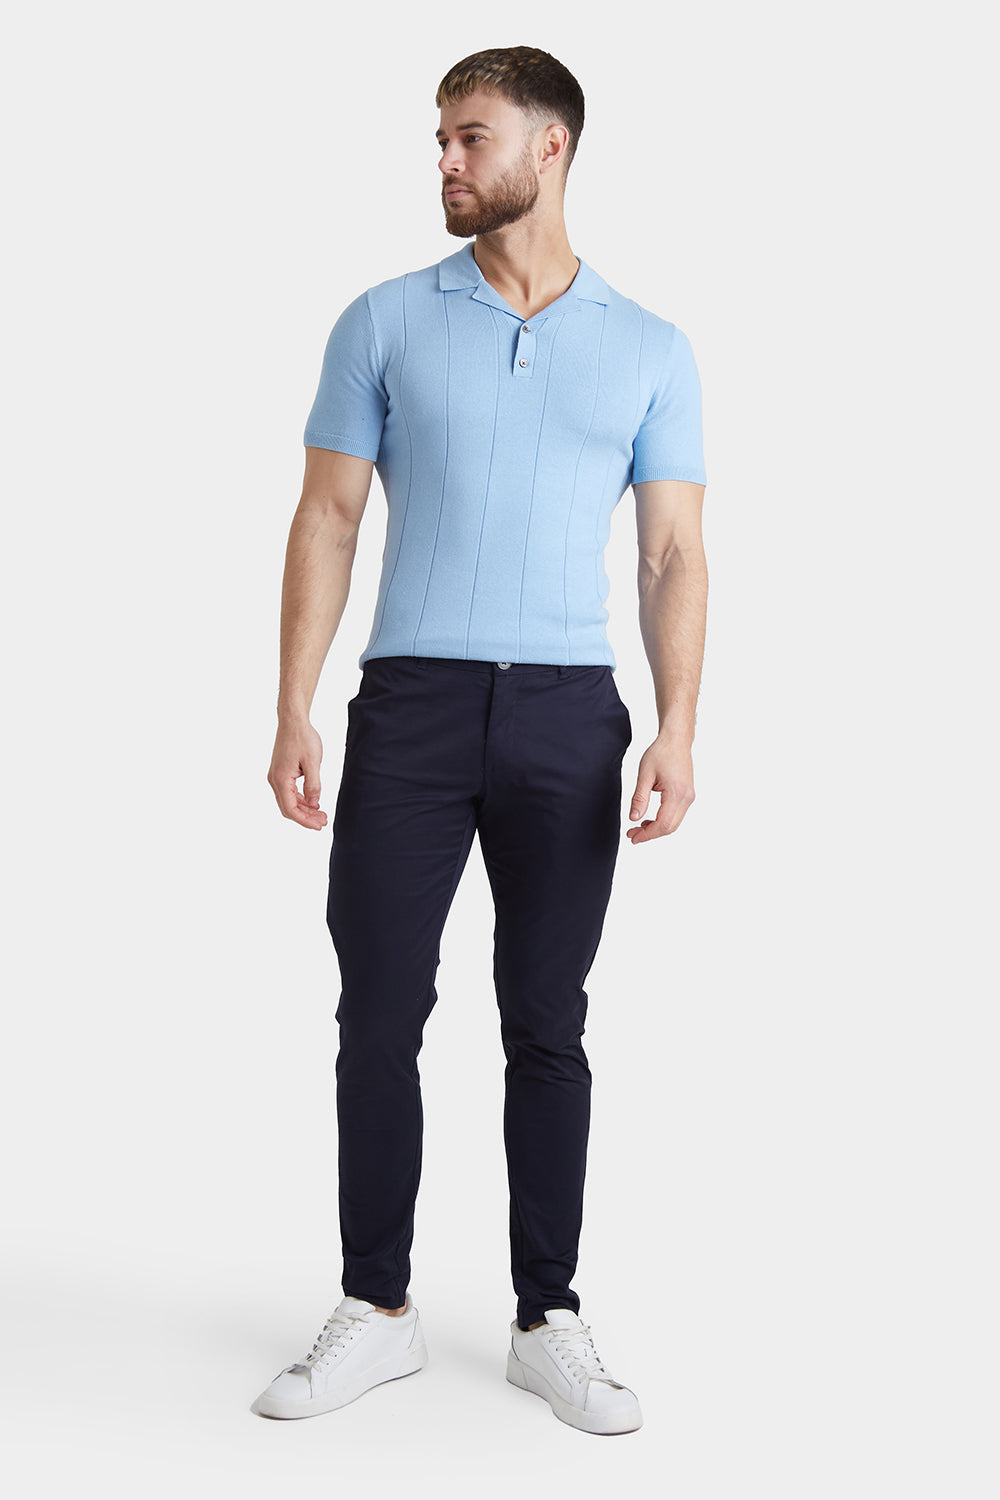 Muscle Fit Chino Trouser in Navy - TAILORED ATHLETE - ROW